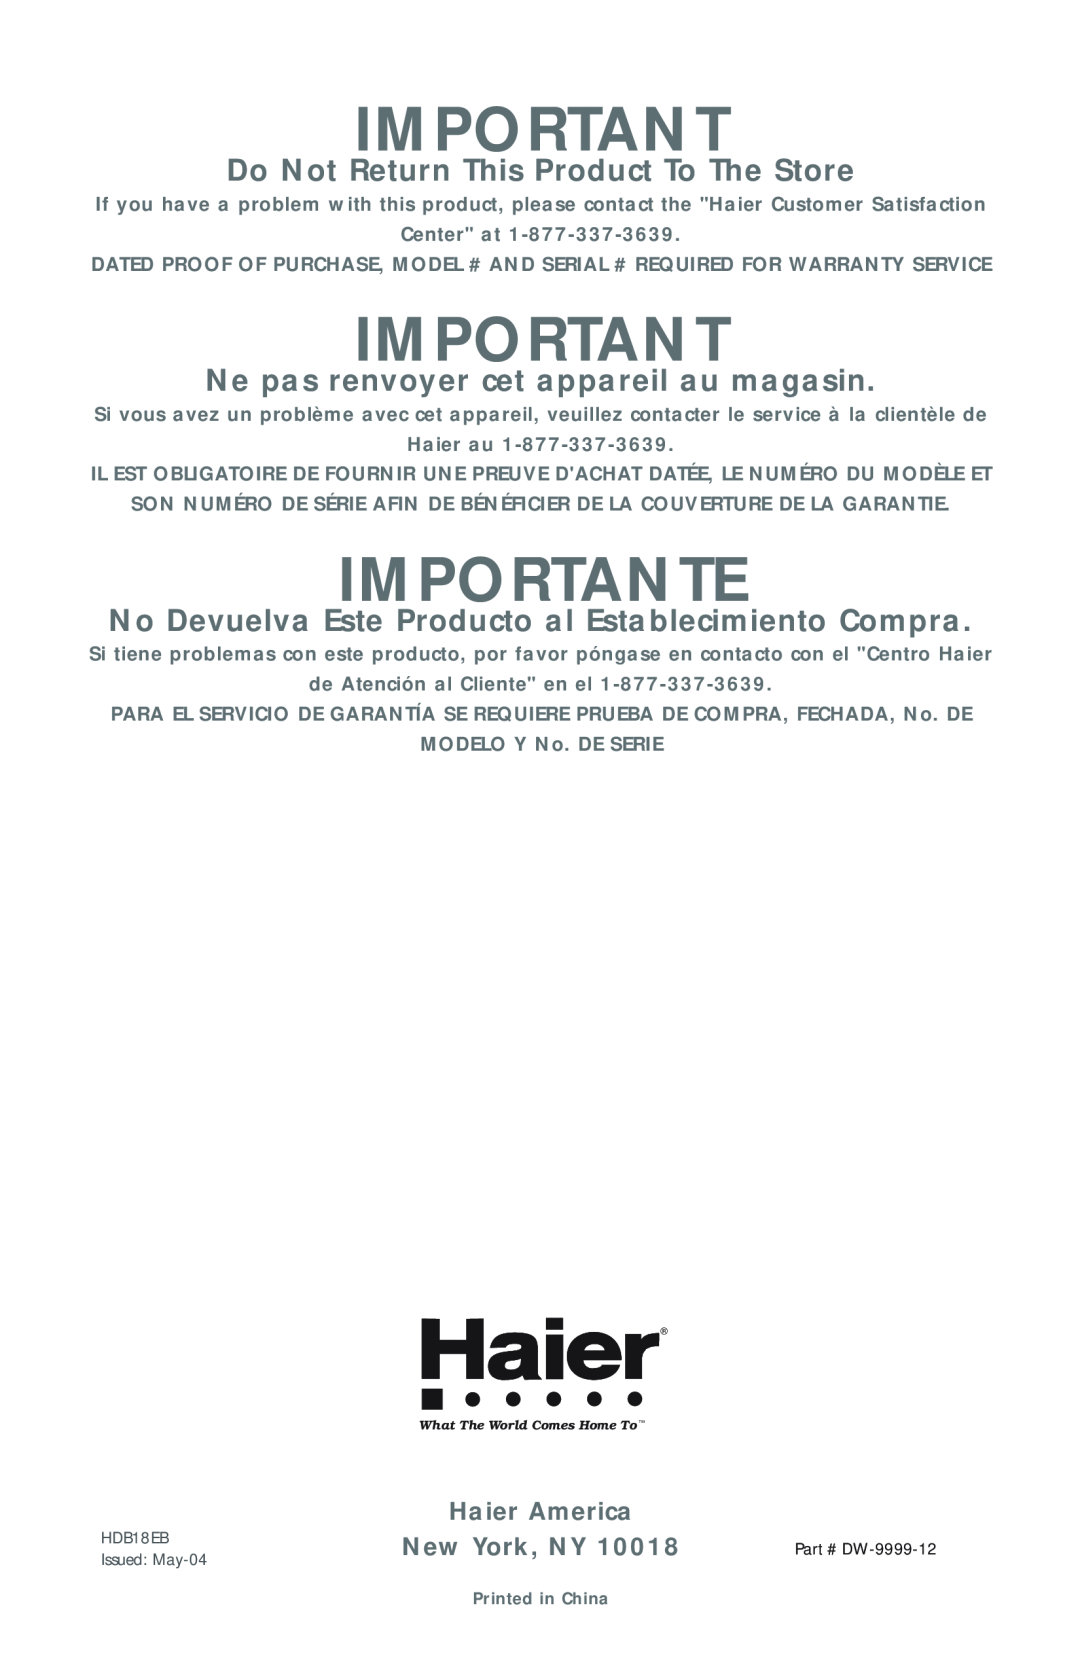 Haier HDB18EB Importante, Do Not Return This Product To The Store, Ne pas renvoyer cet appareil au magasin, Haier America 